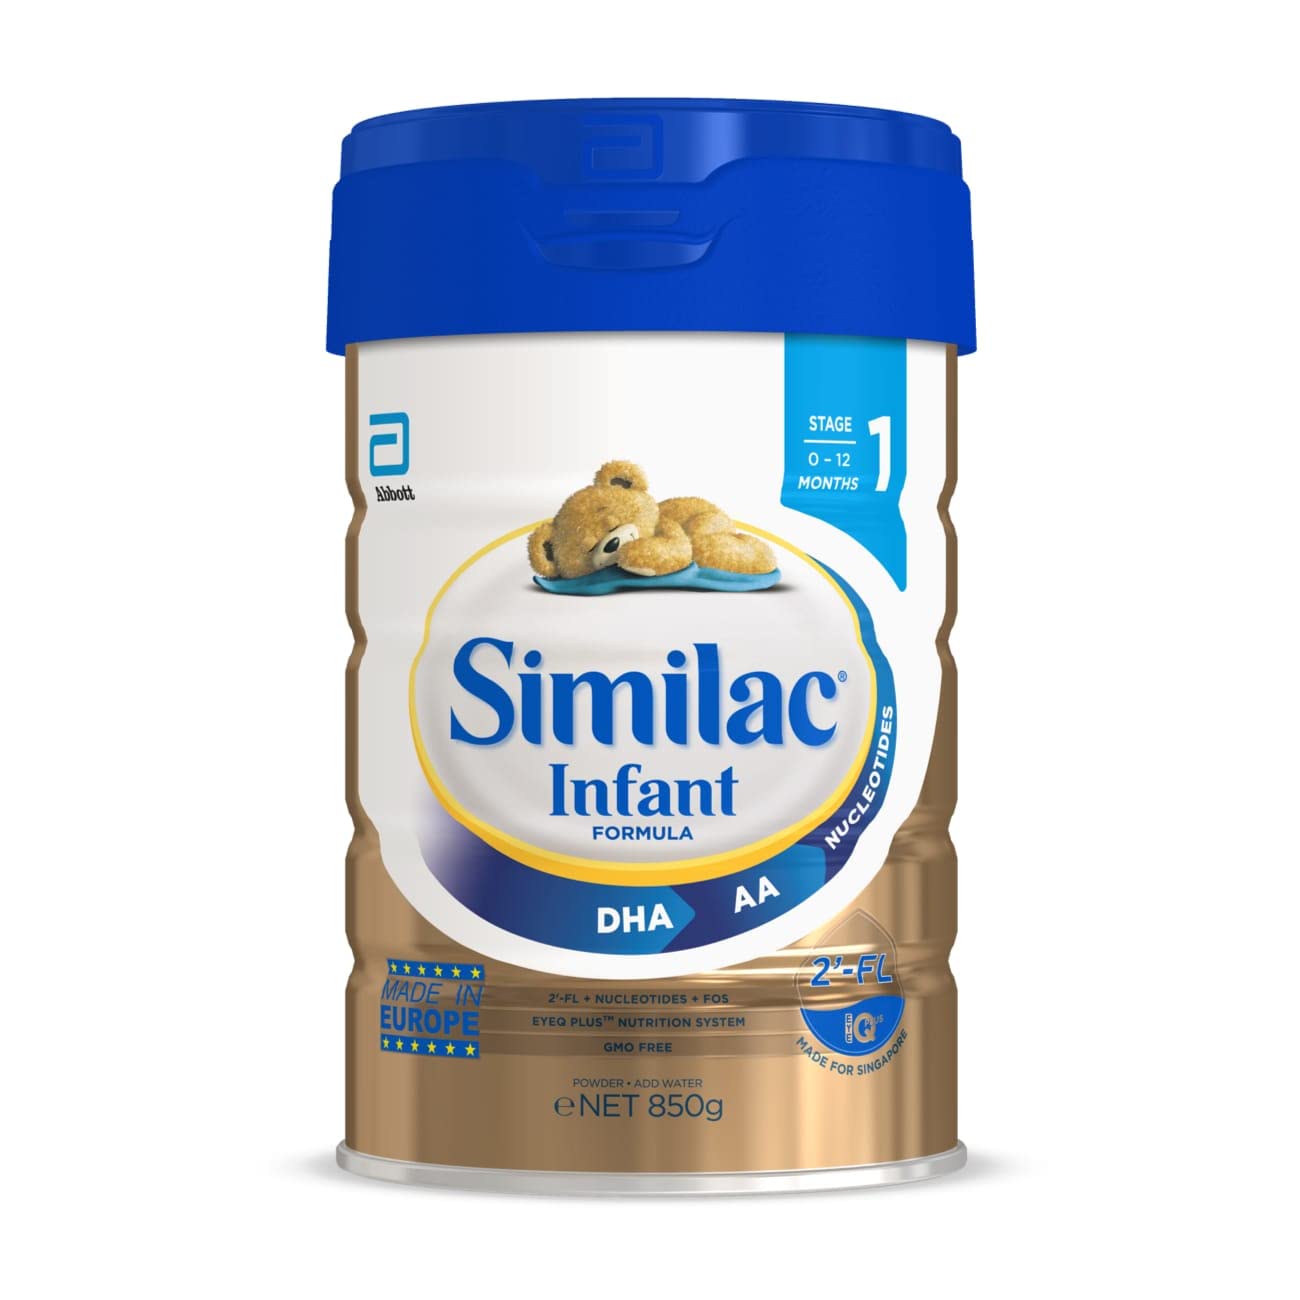 29.9-Oz Similac Infant Formula $11.13 w/ S&S + Free Shipping w/ Prime or on orders over $35